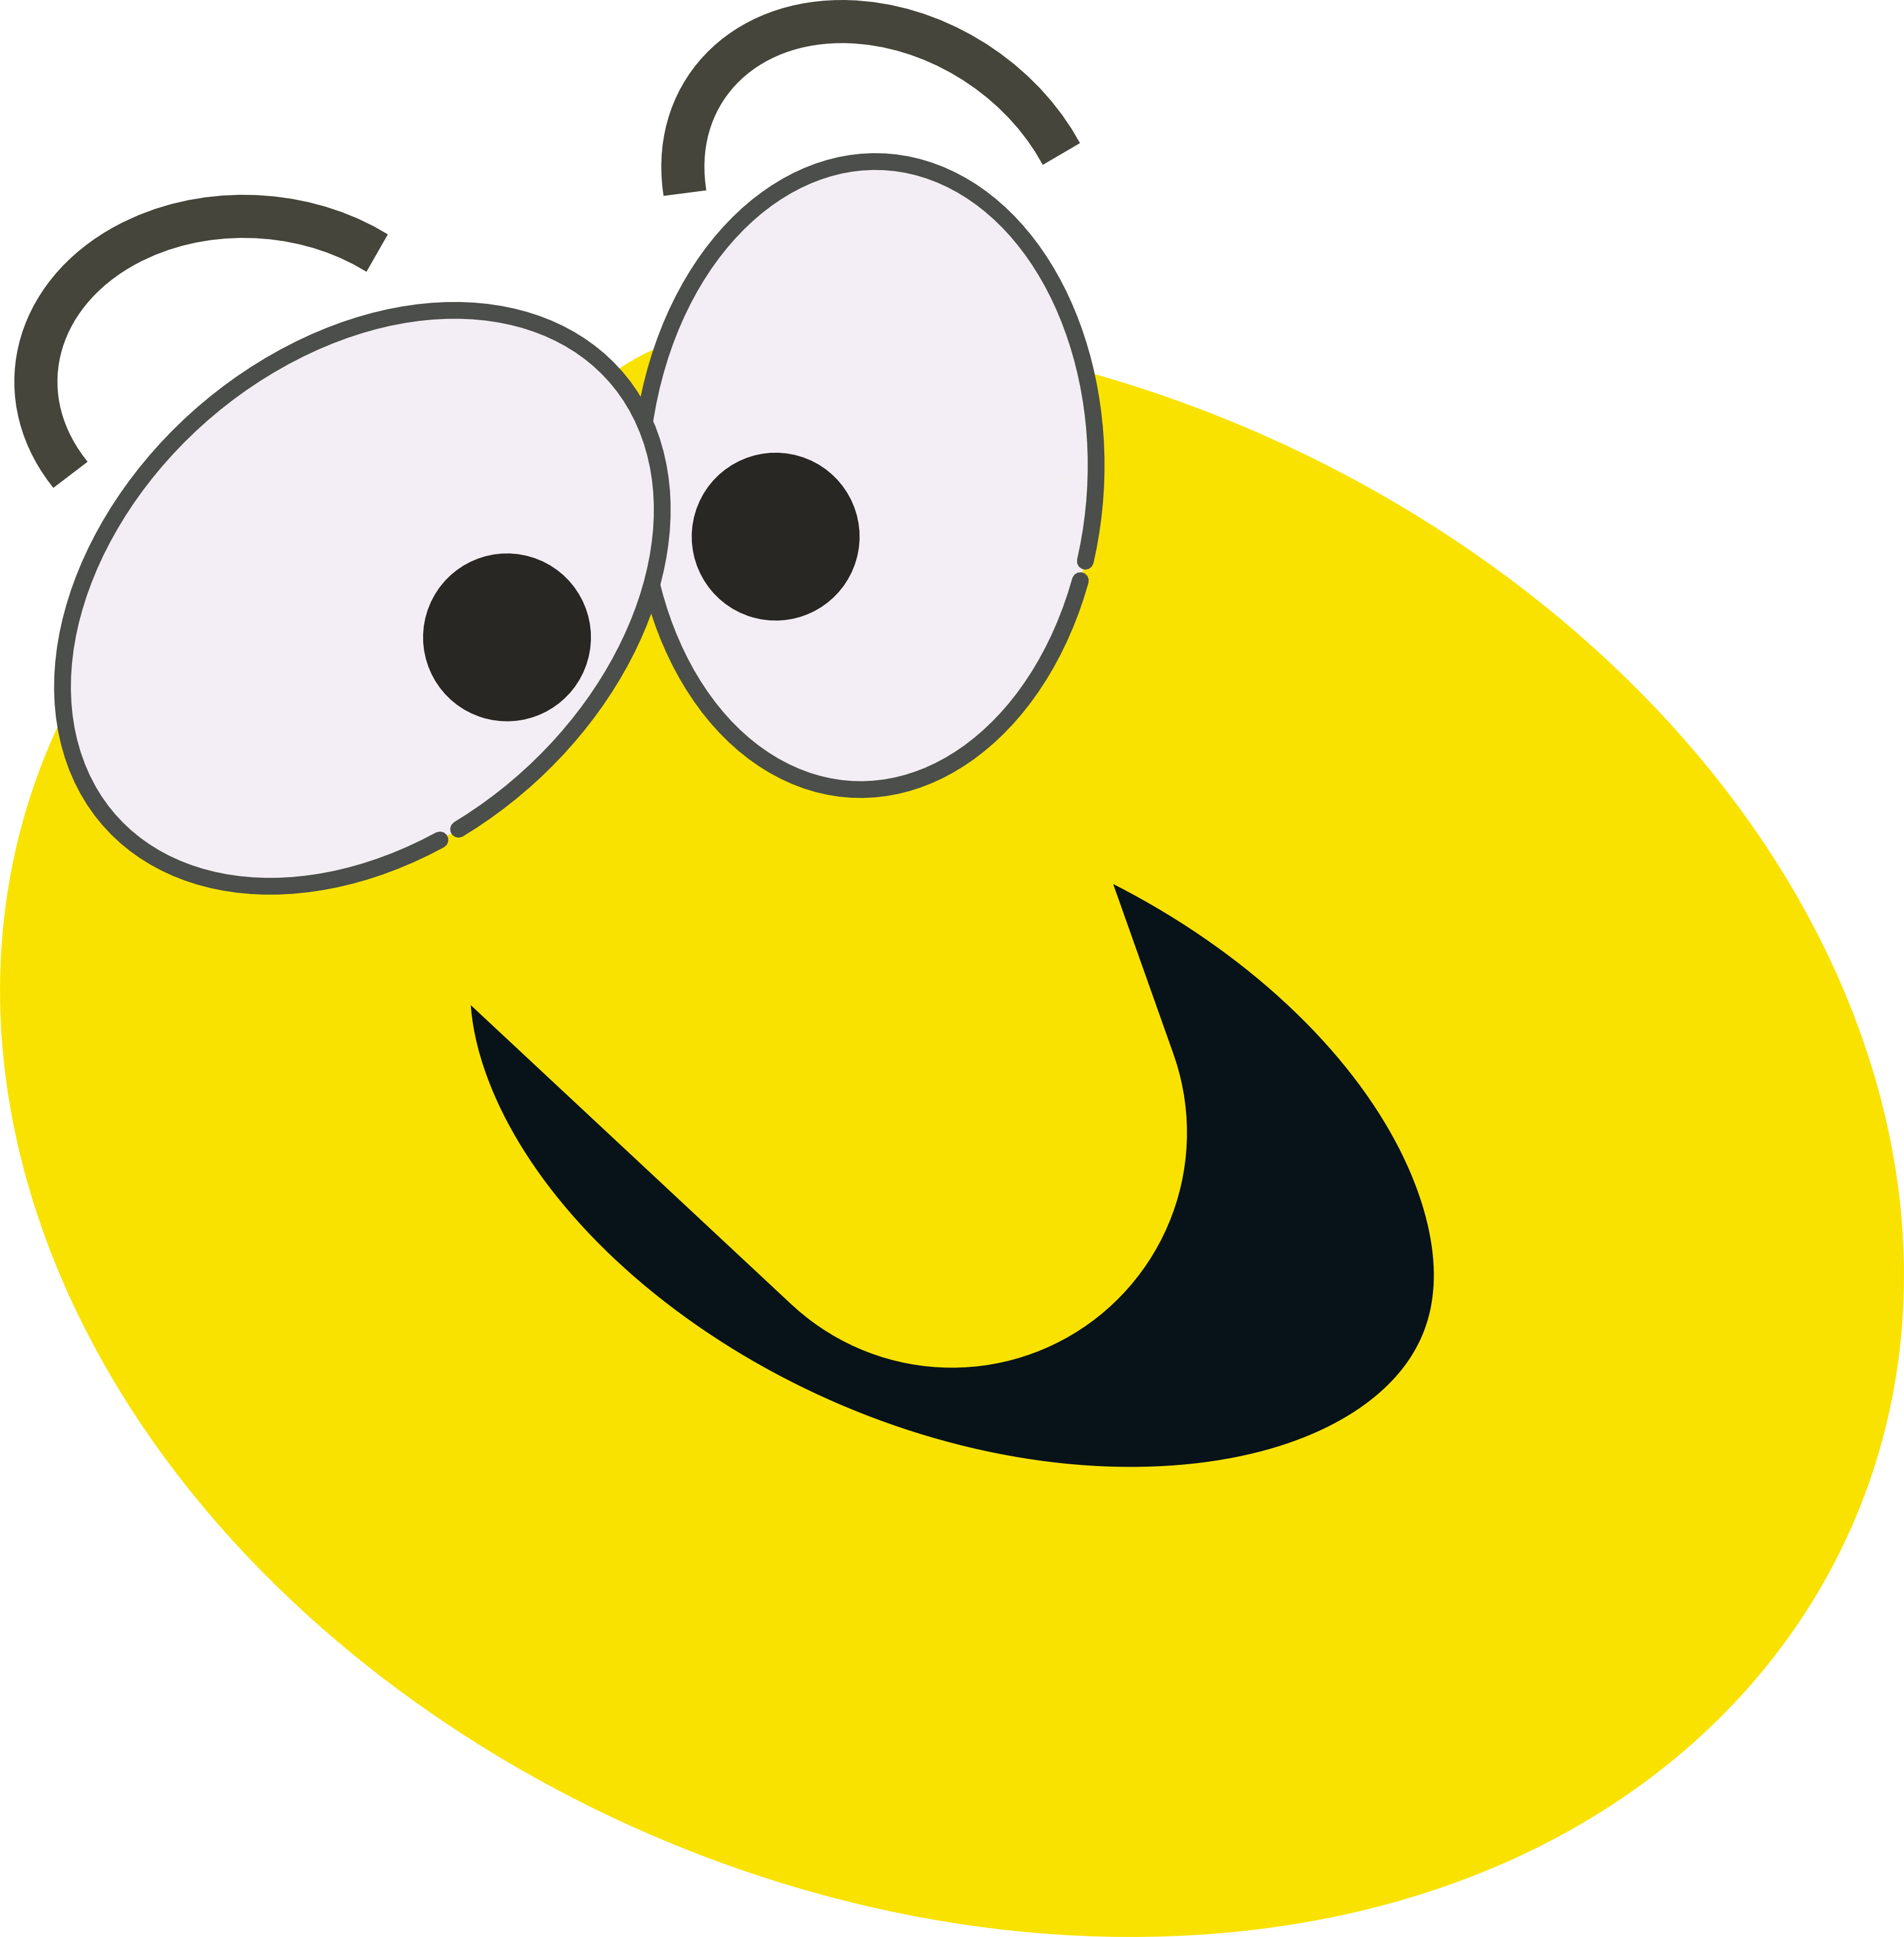 Happy face moving winking smiley face clipart - Cliparting.com